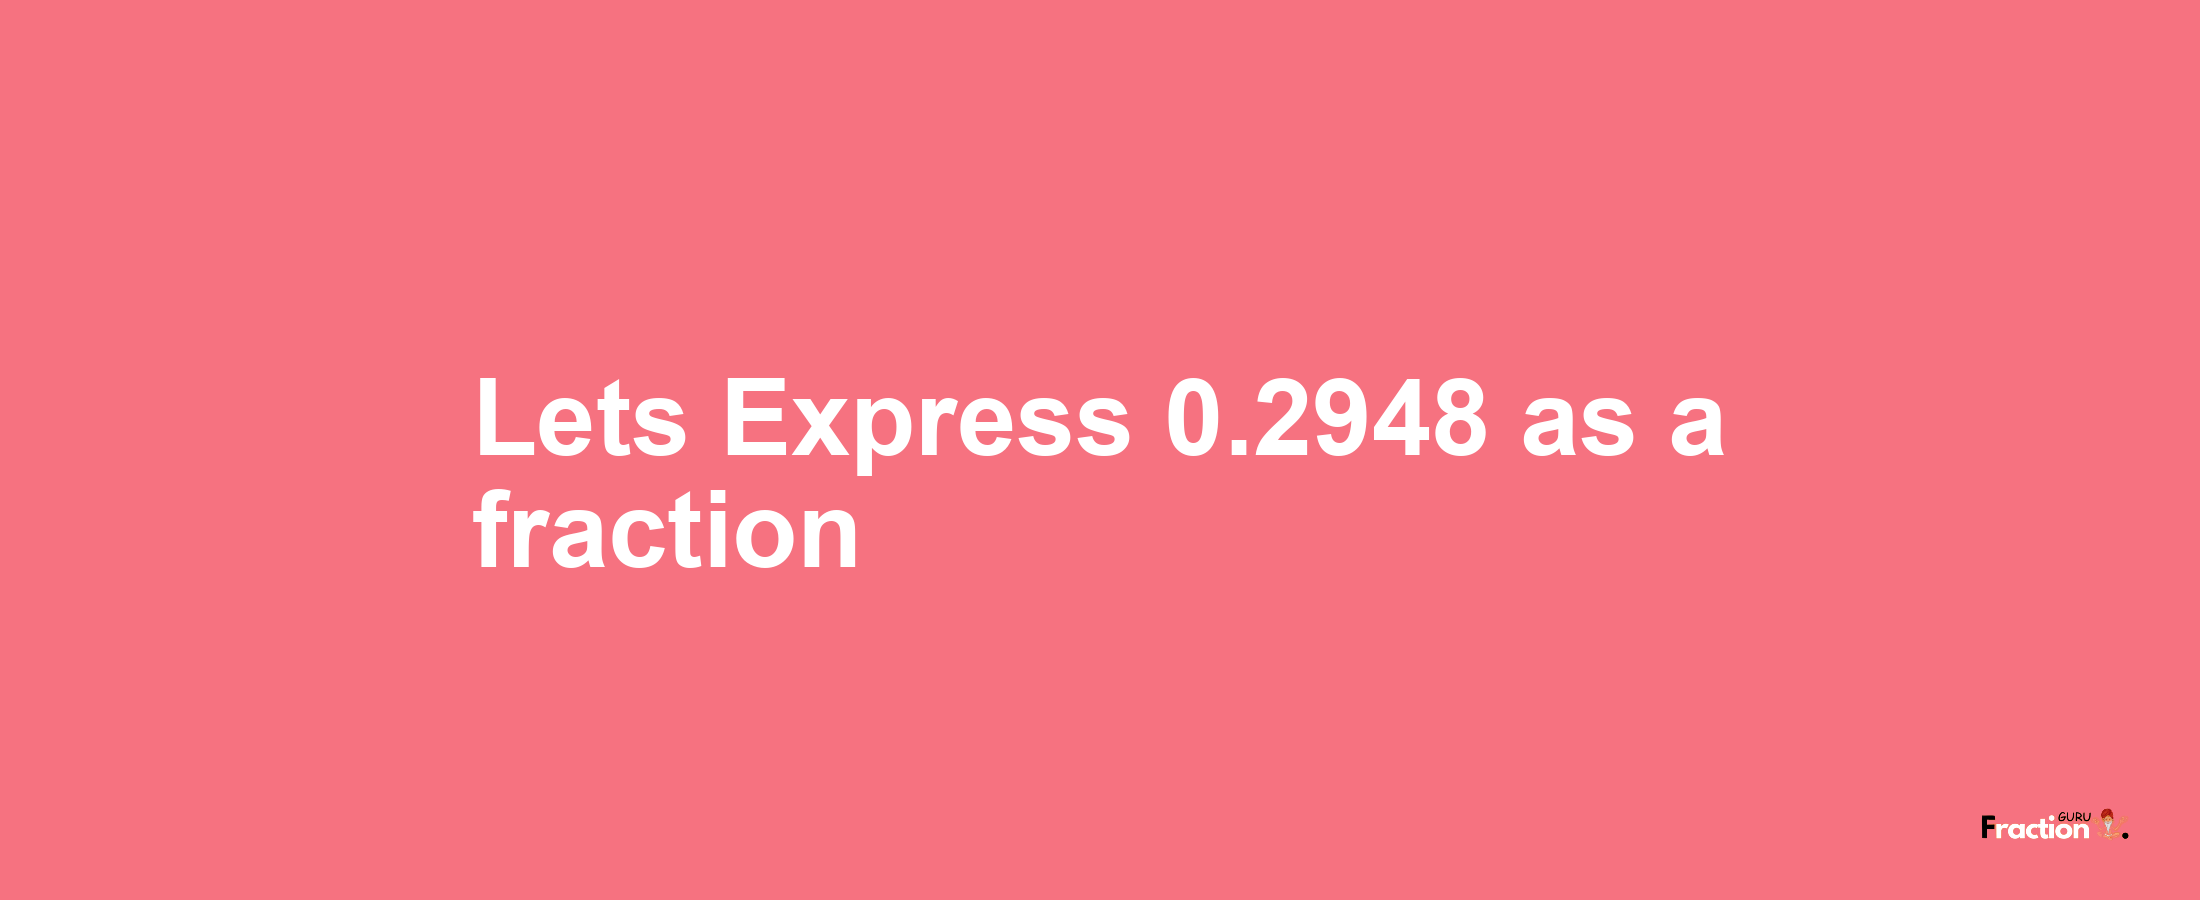 Lets Express 0.2948 as afraction